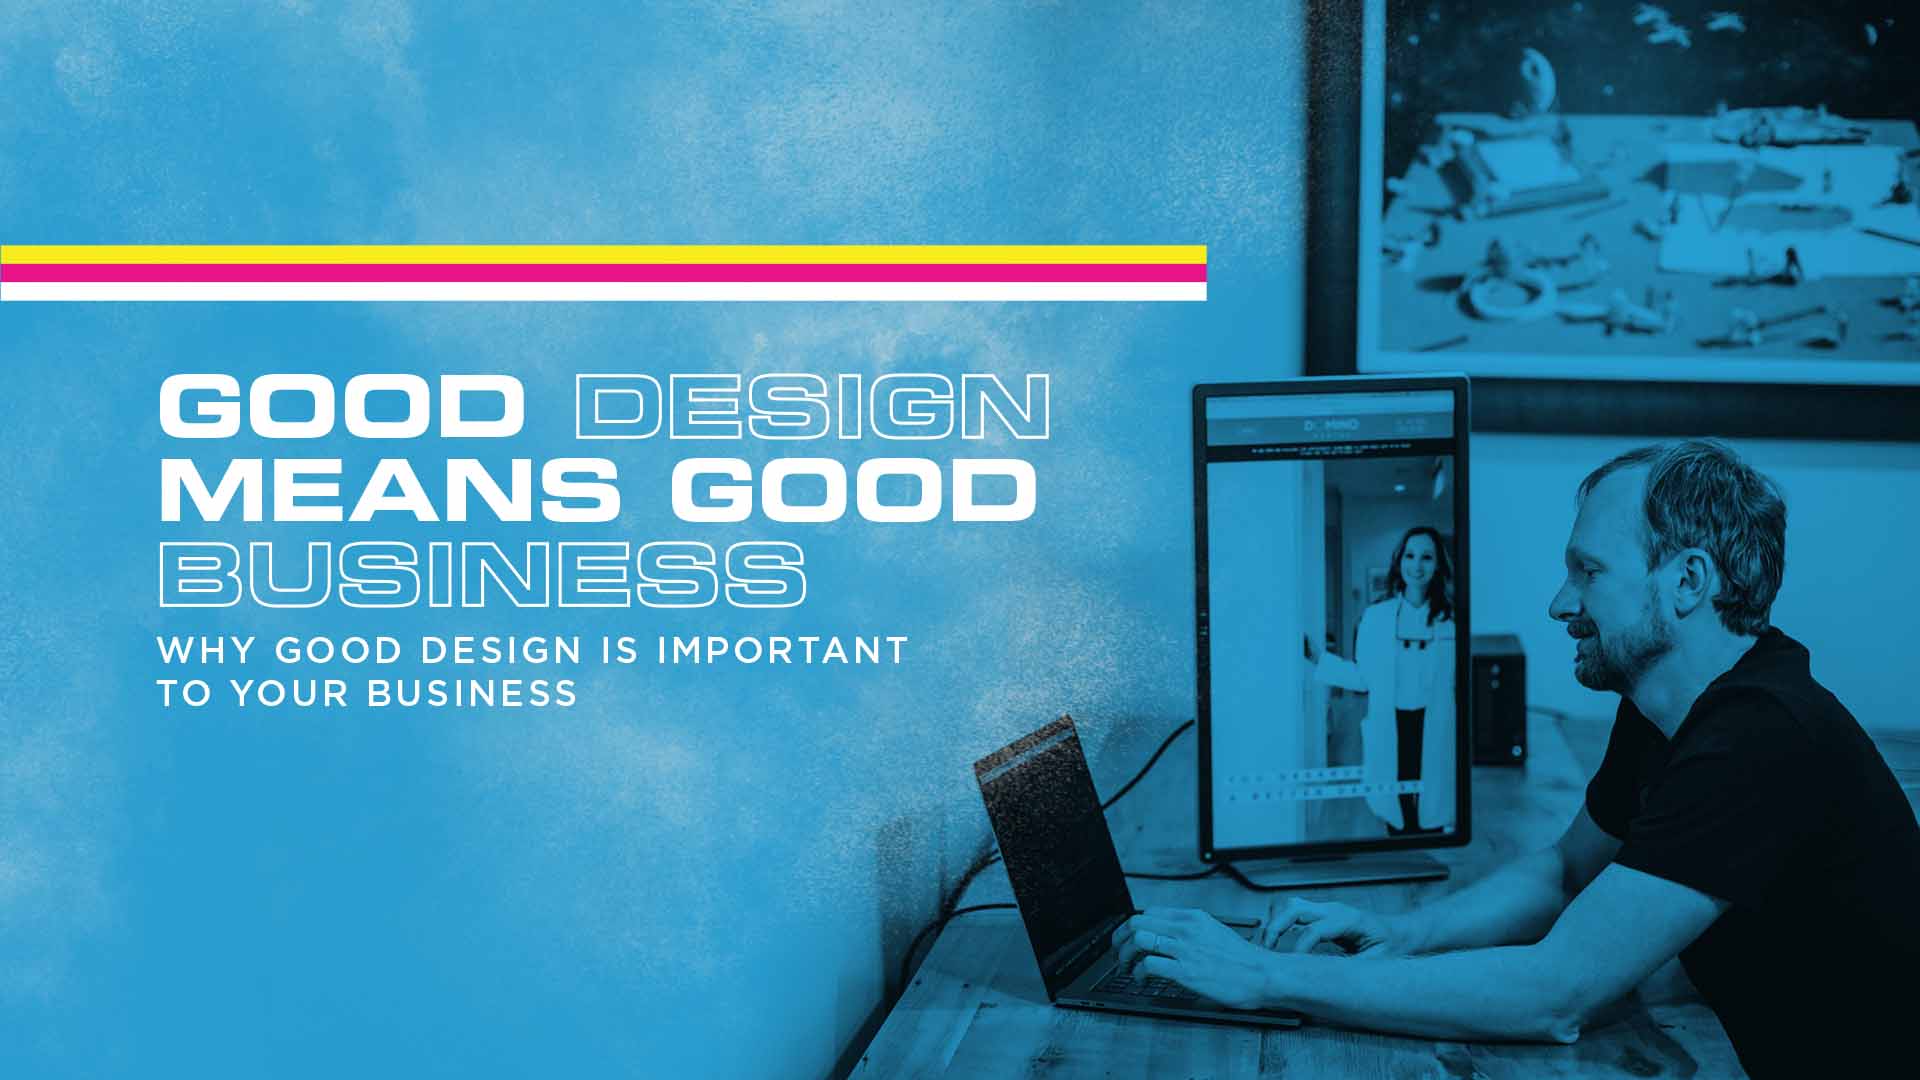 Good Design Means Good Business: Why good design is important to your business.